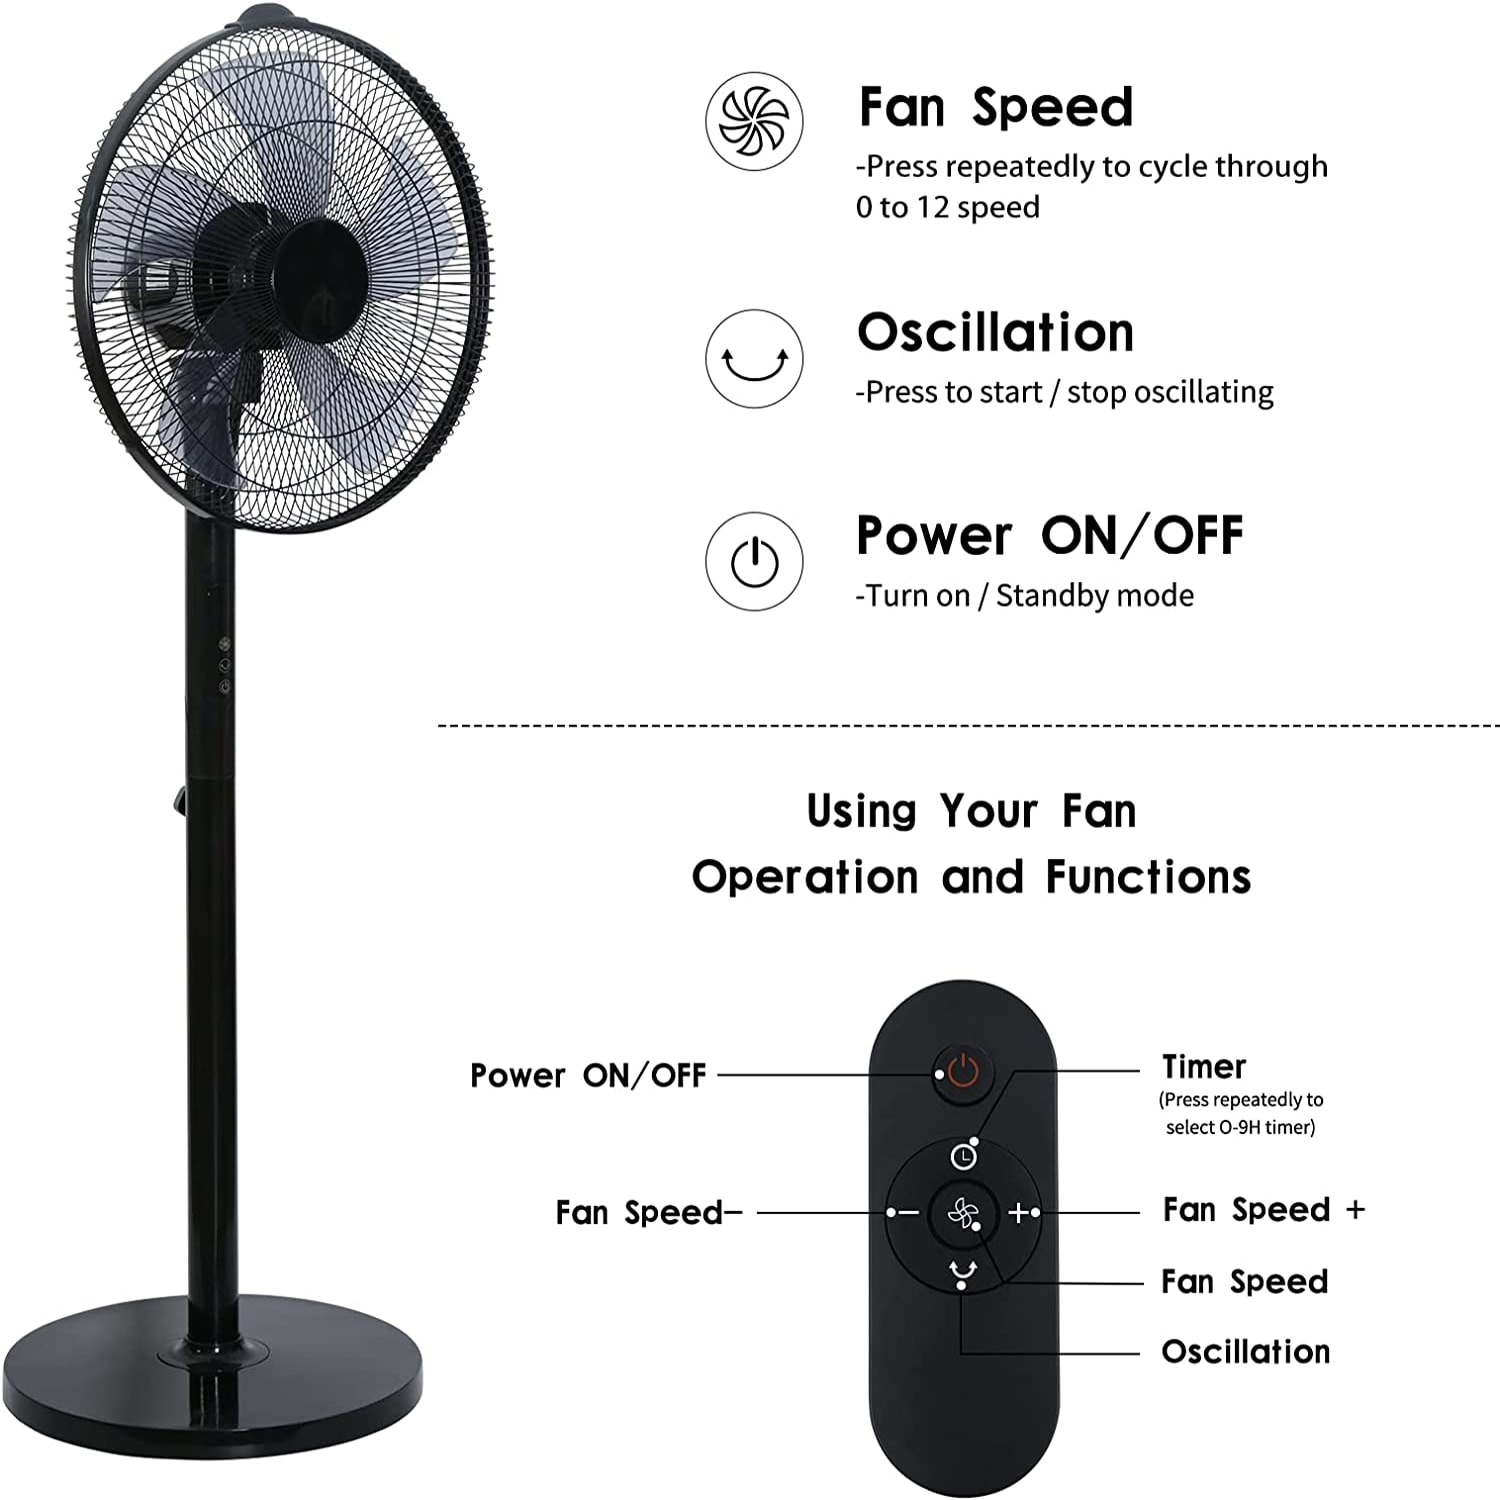 GZMR 14.5-in 12-Speed Indoor Black Oscillating Pedestal Fan with Remote in the Portable at Lowes.com